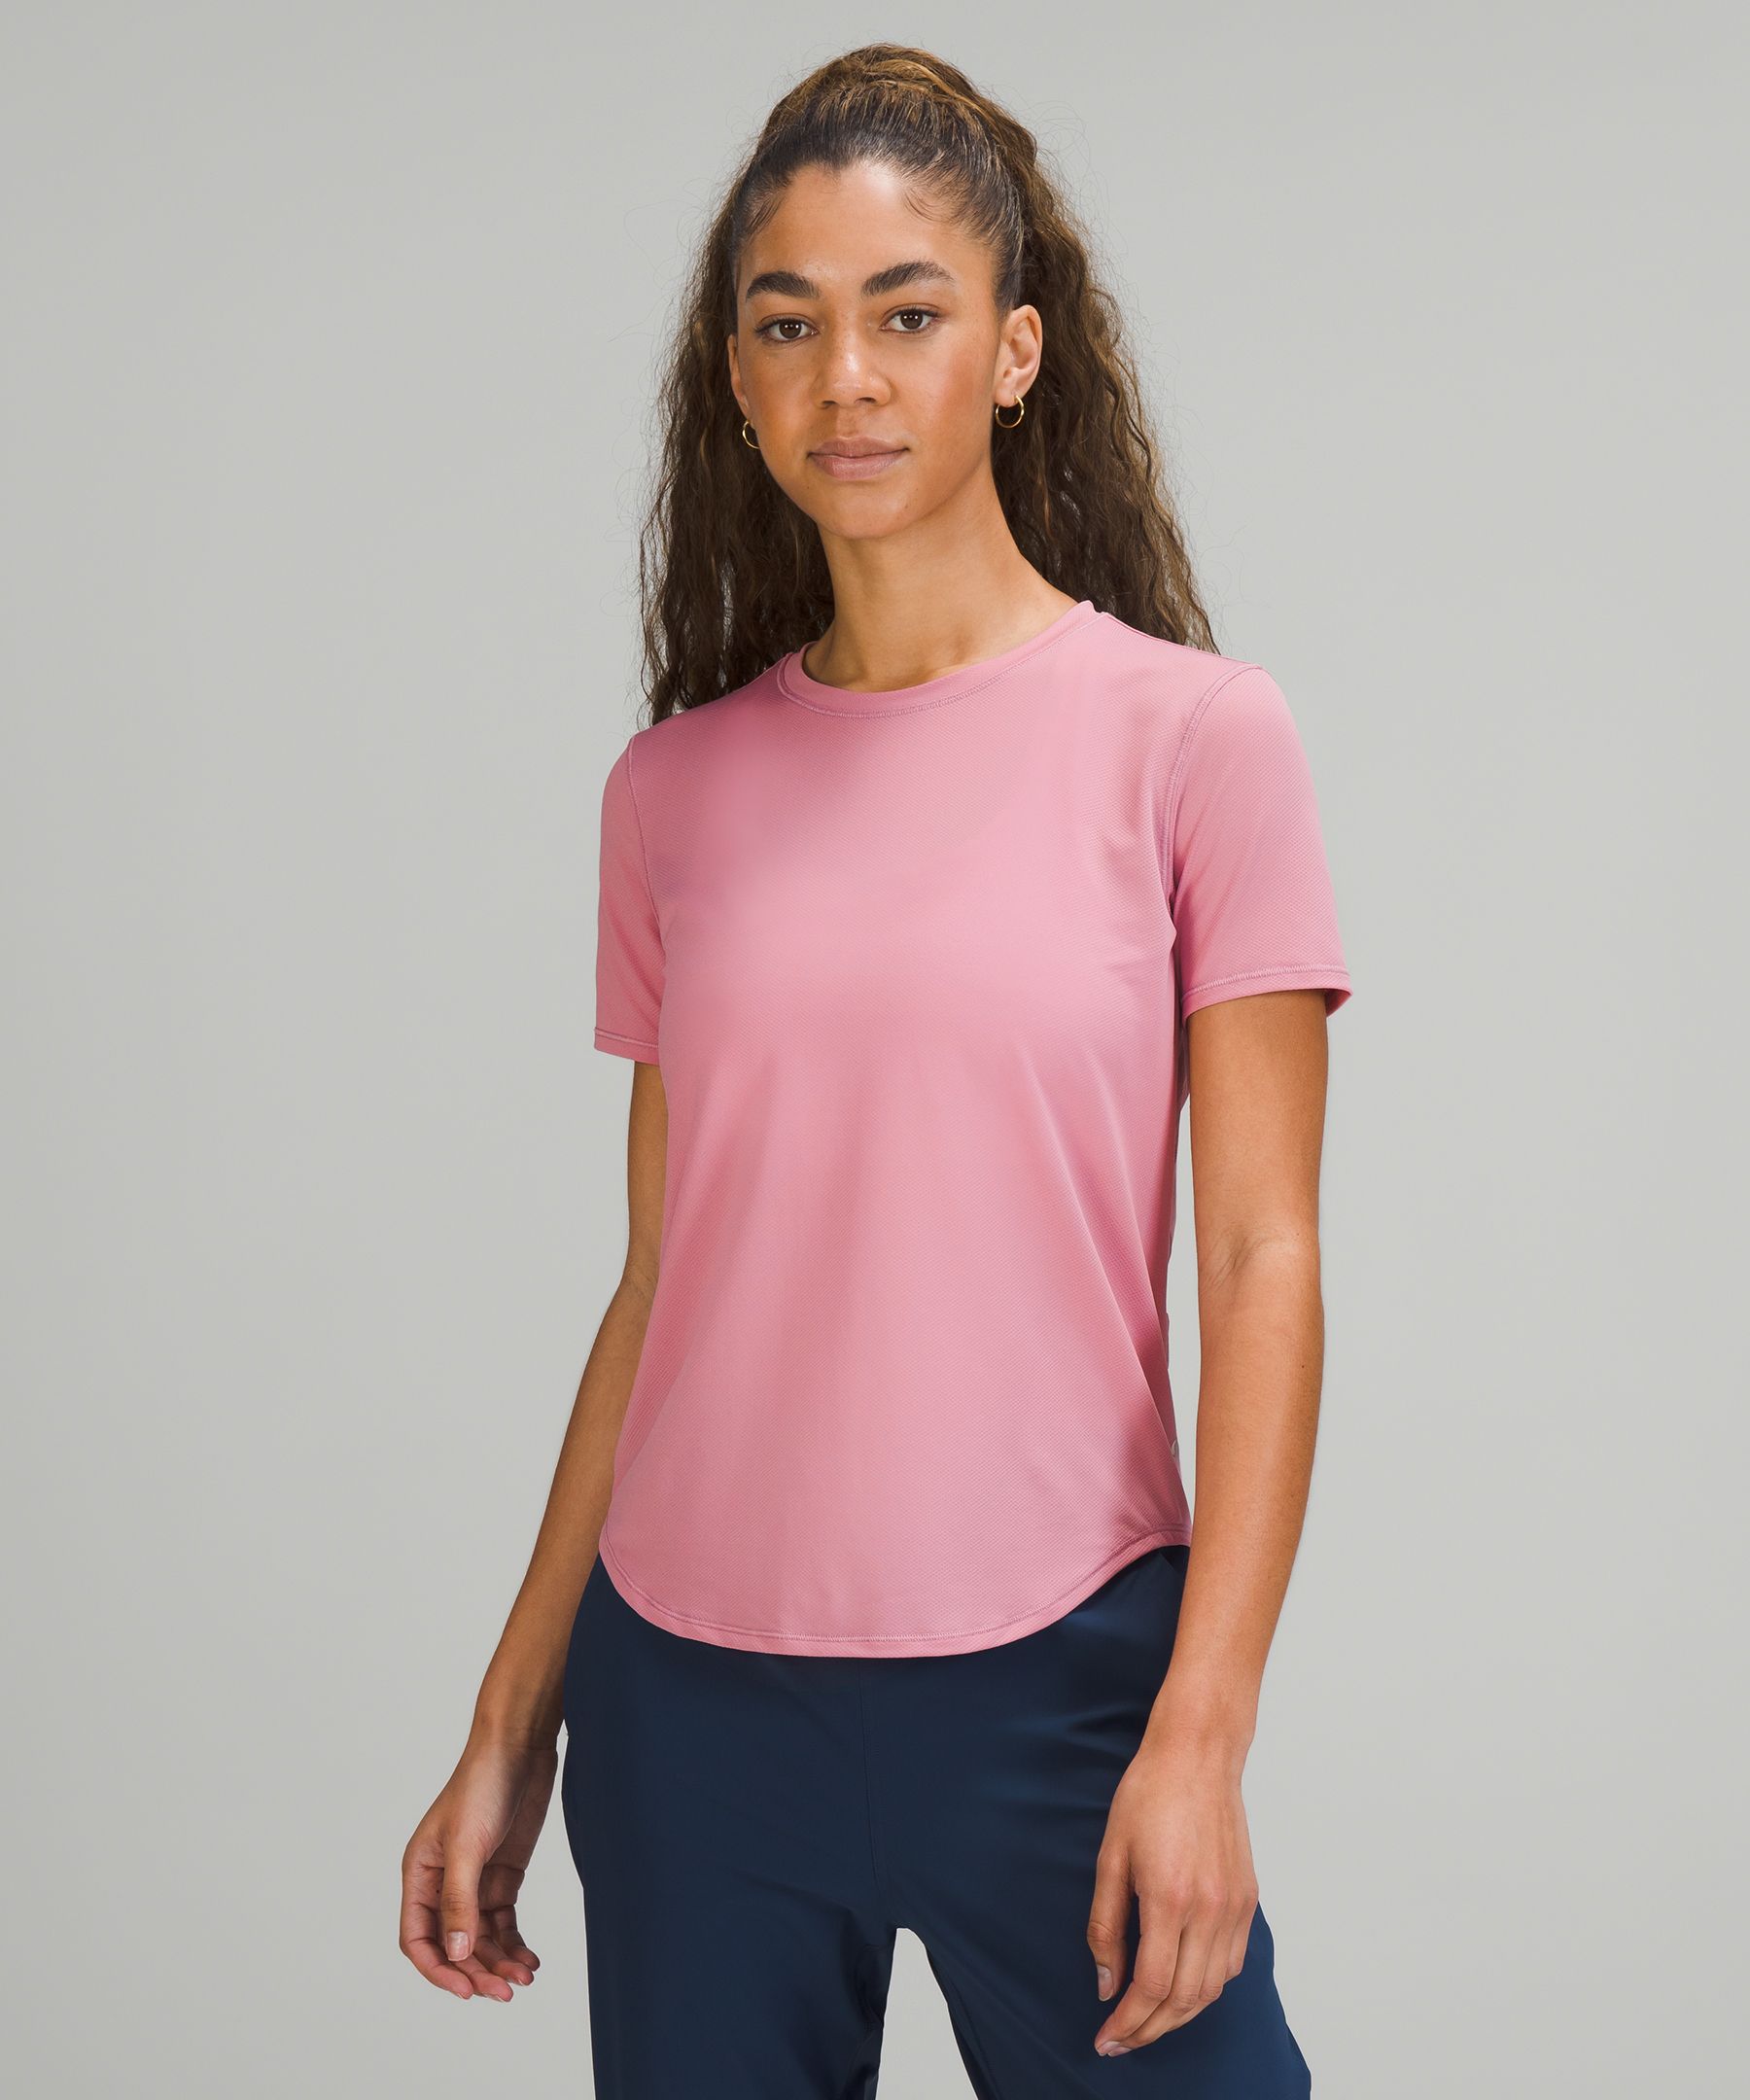 Lululemon High-neck Running And Training T-shirt In Pink